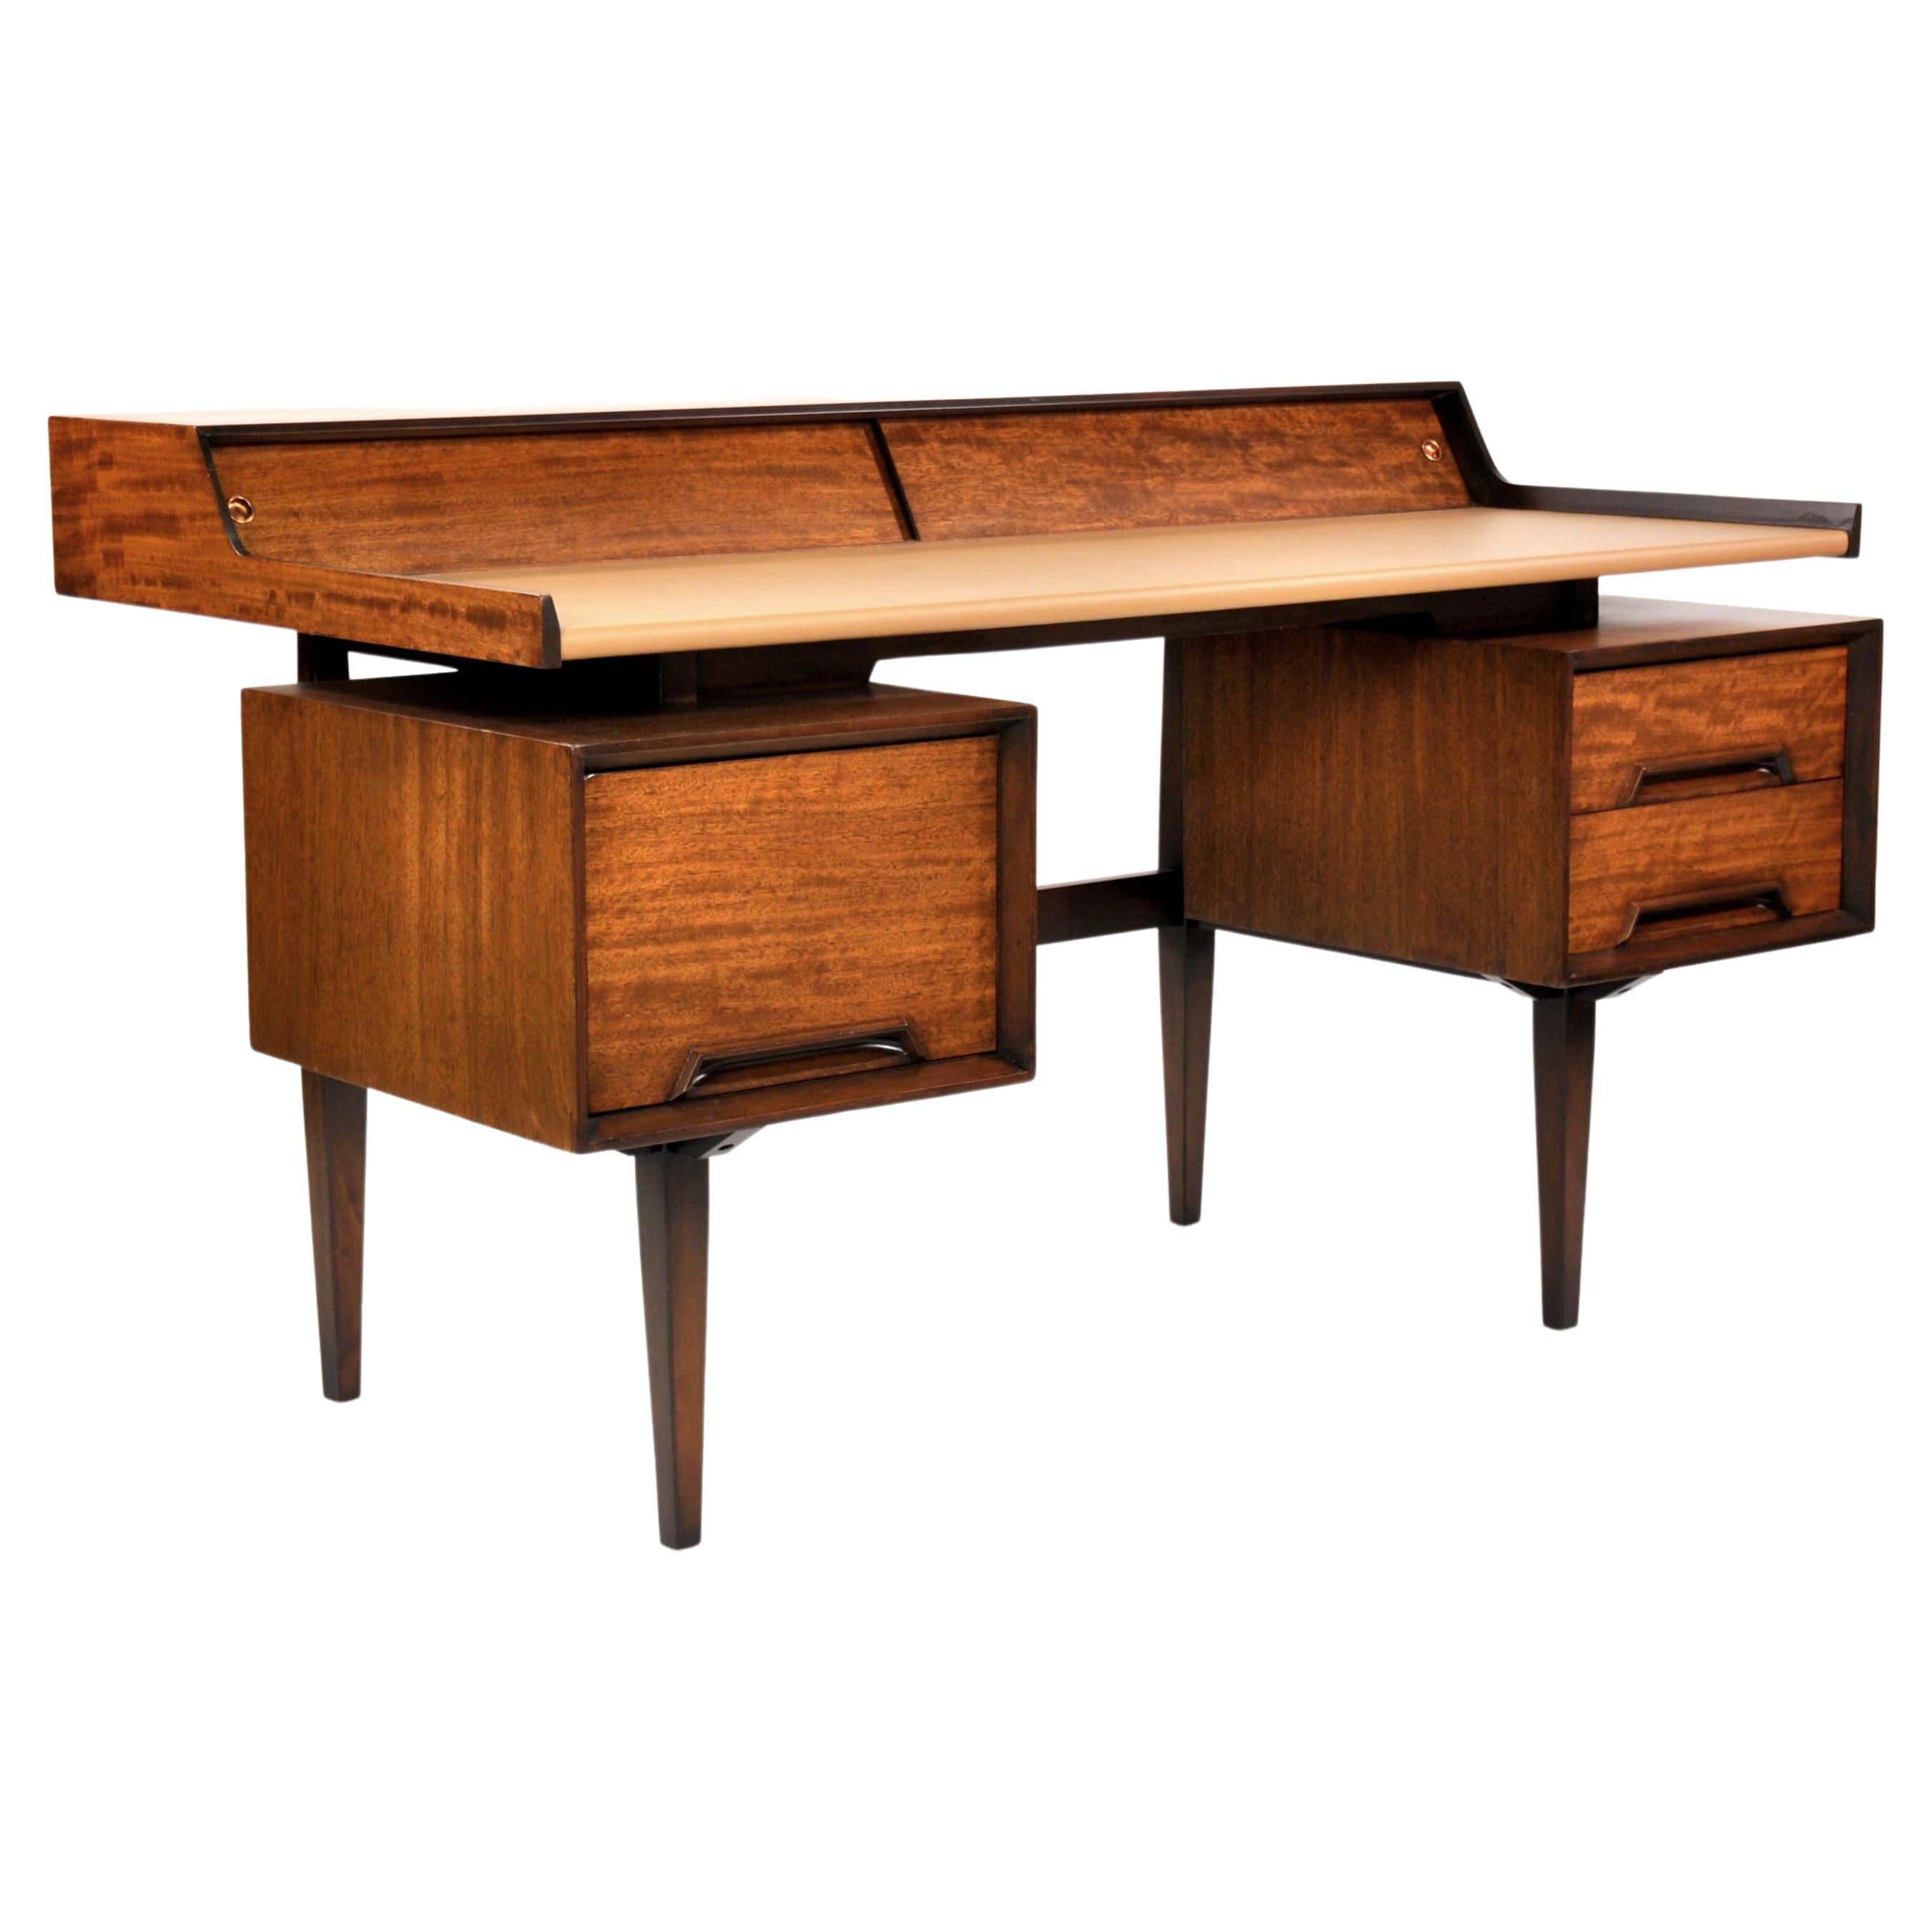 Milo Baughman for Drexel Perspective Mindoro and Leather Desk 3